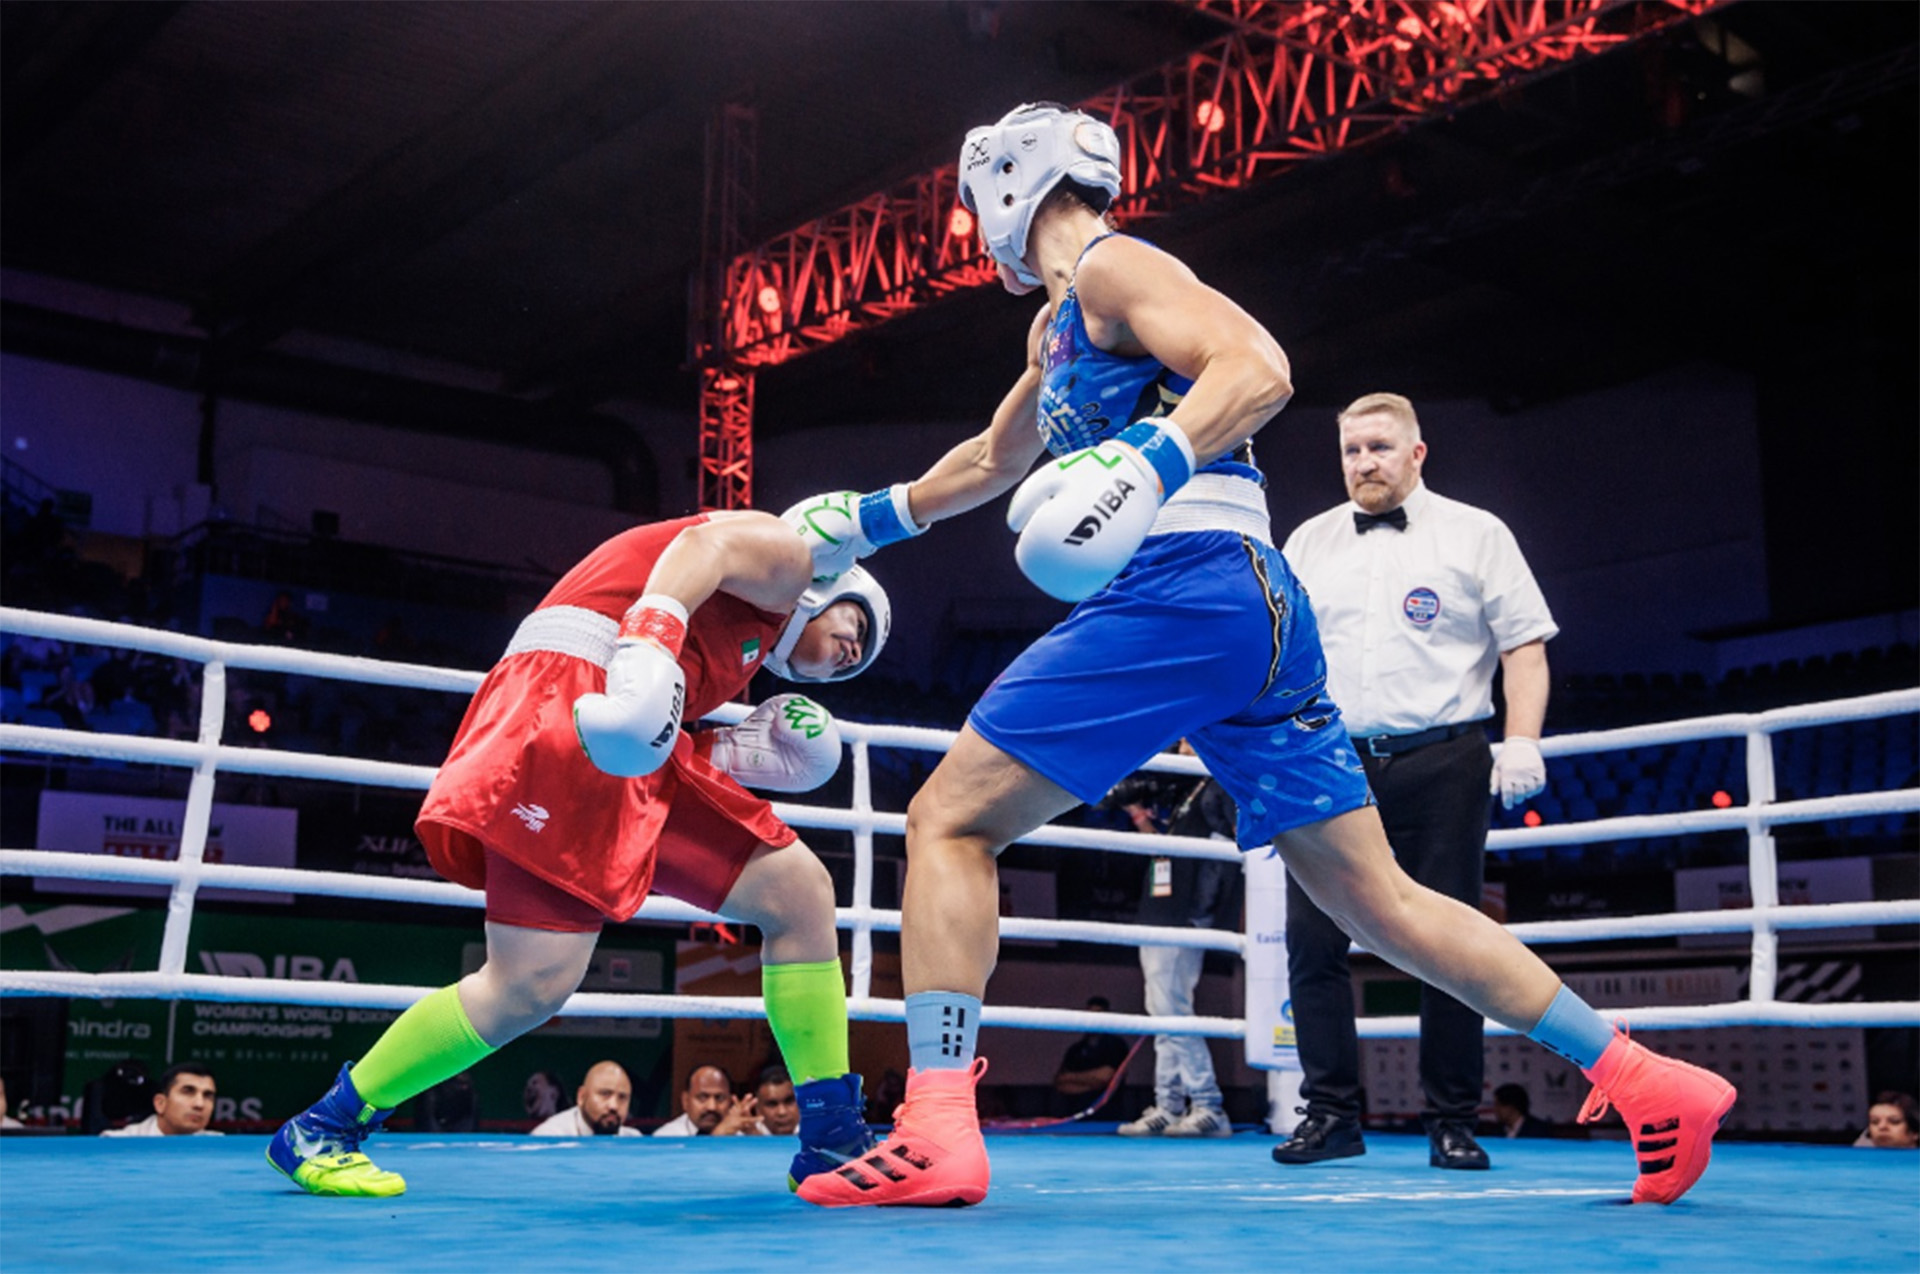 The Women's Boxing World Championship in New Delhi was boycotted by more than 10 countries due to the presence of Russians and Belarusians